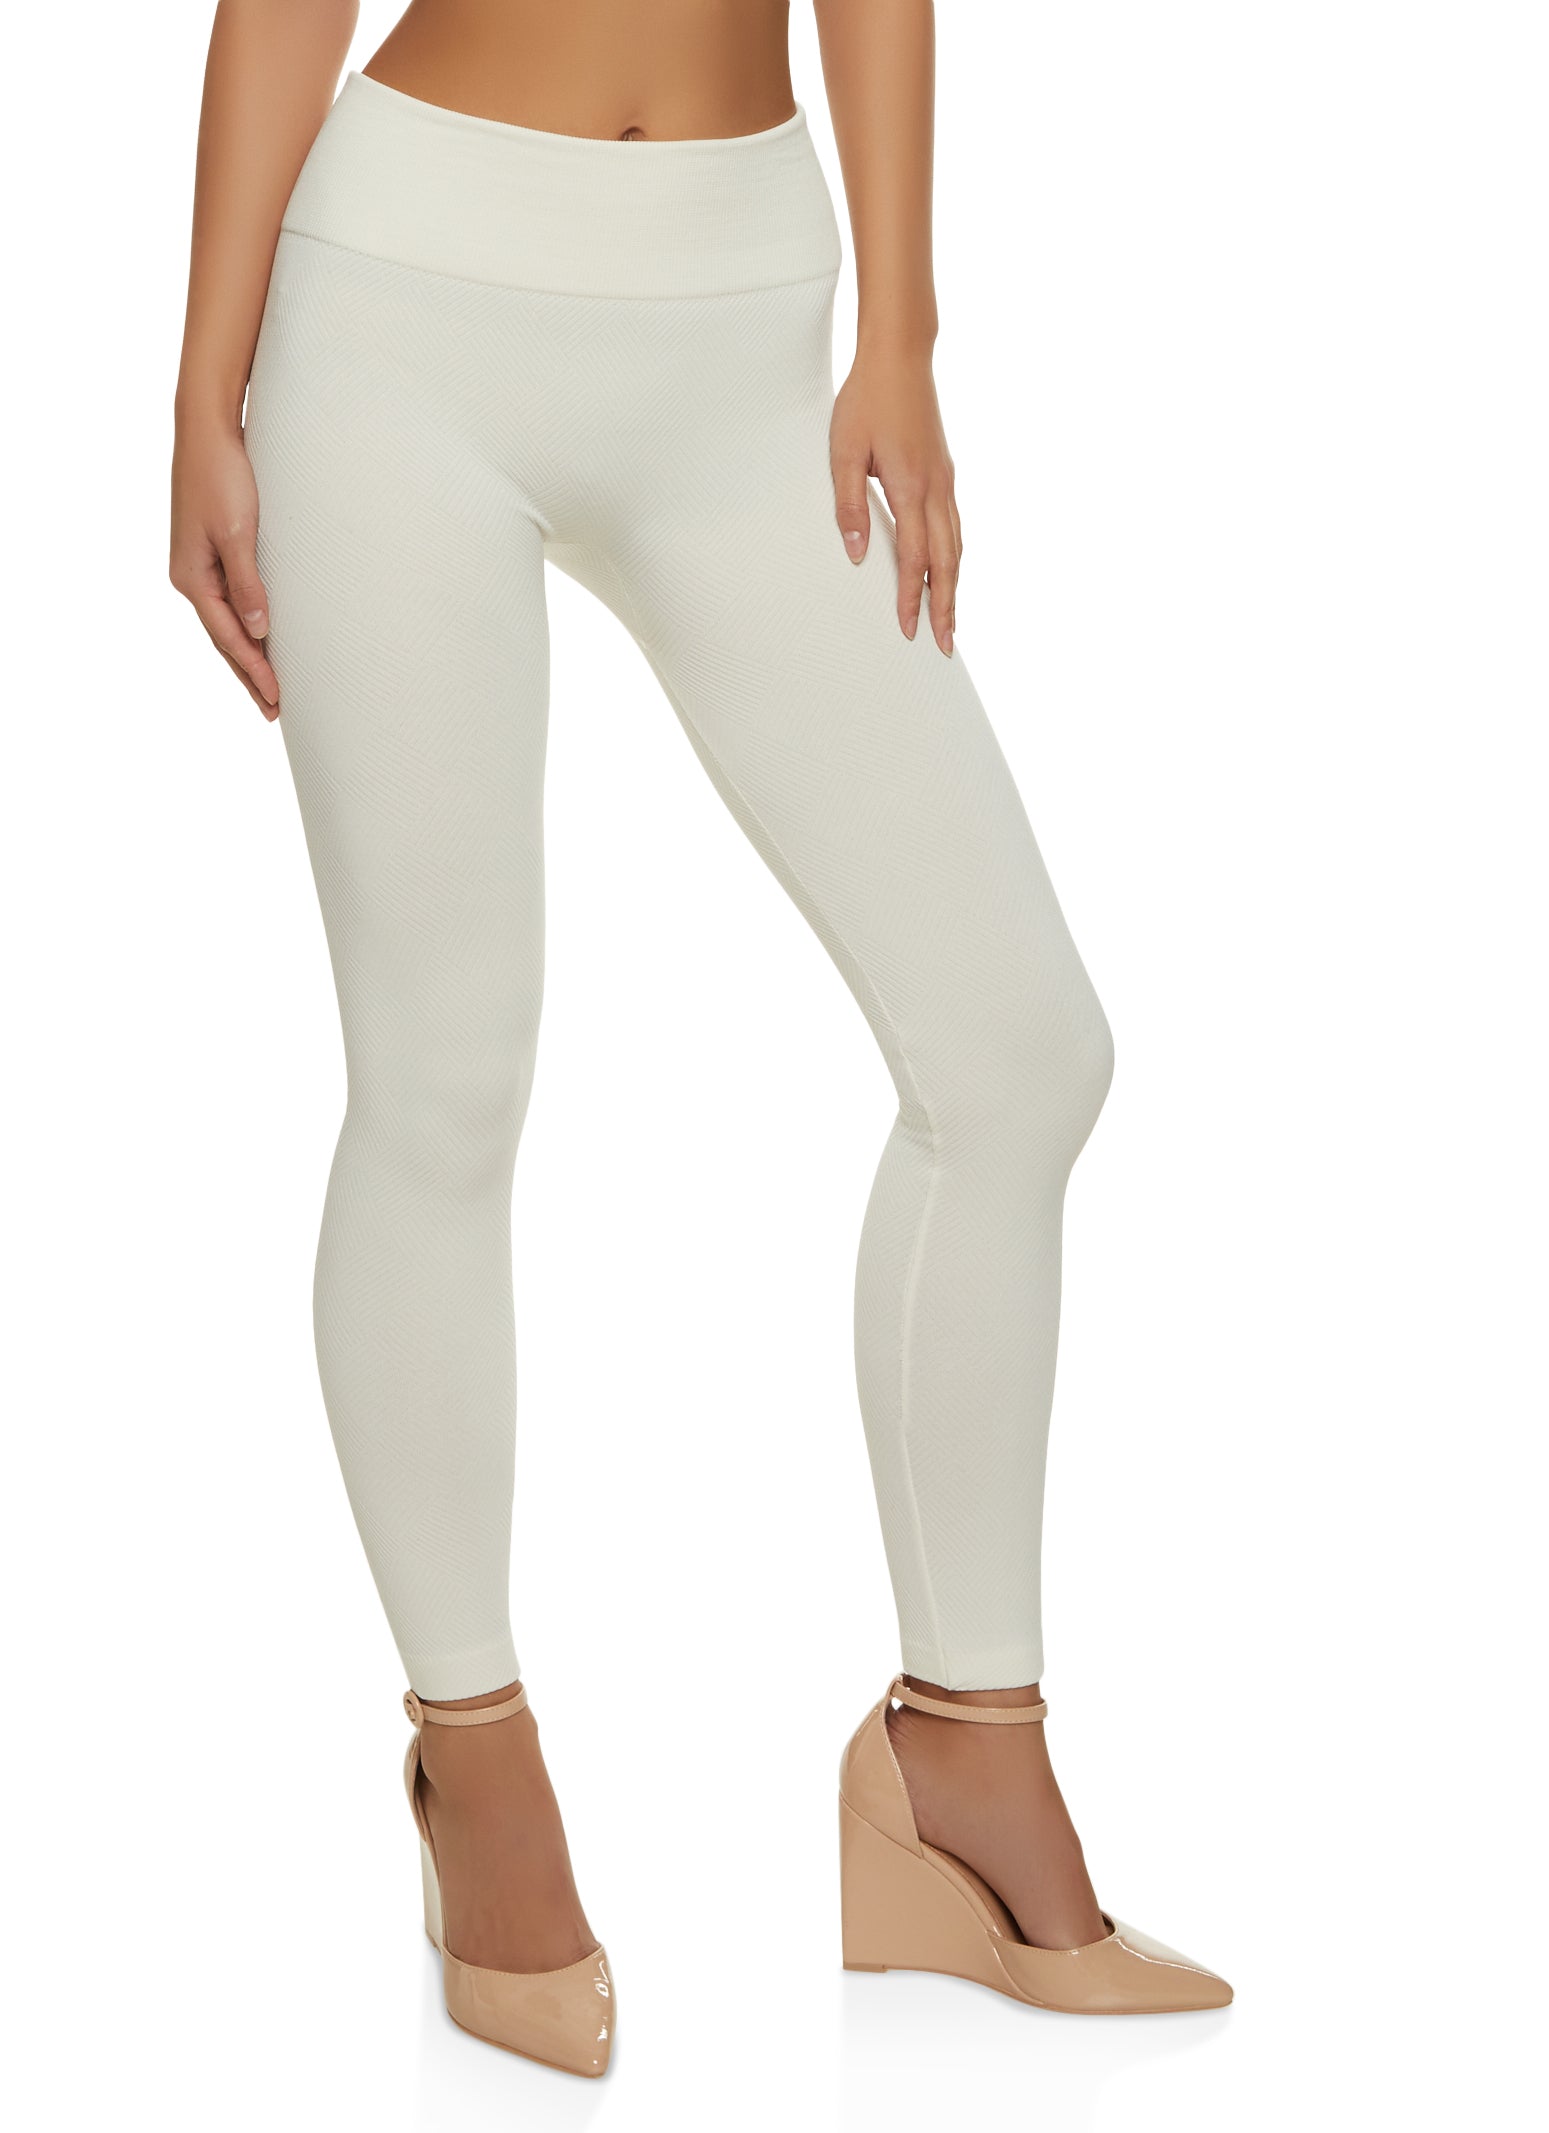 Spanx Assets by Seamless Denim Washed Leggings XL - $35 - From